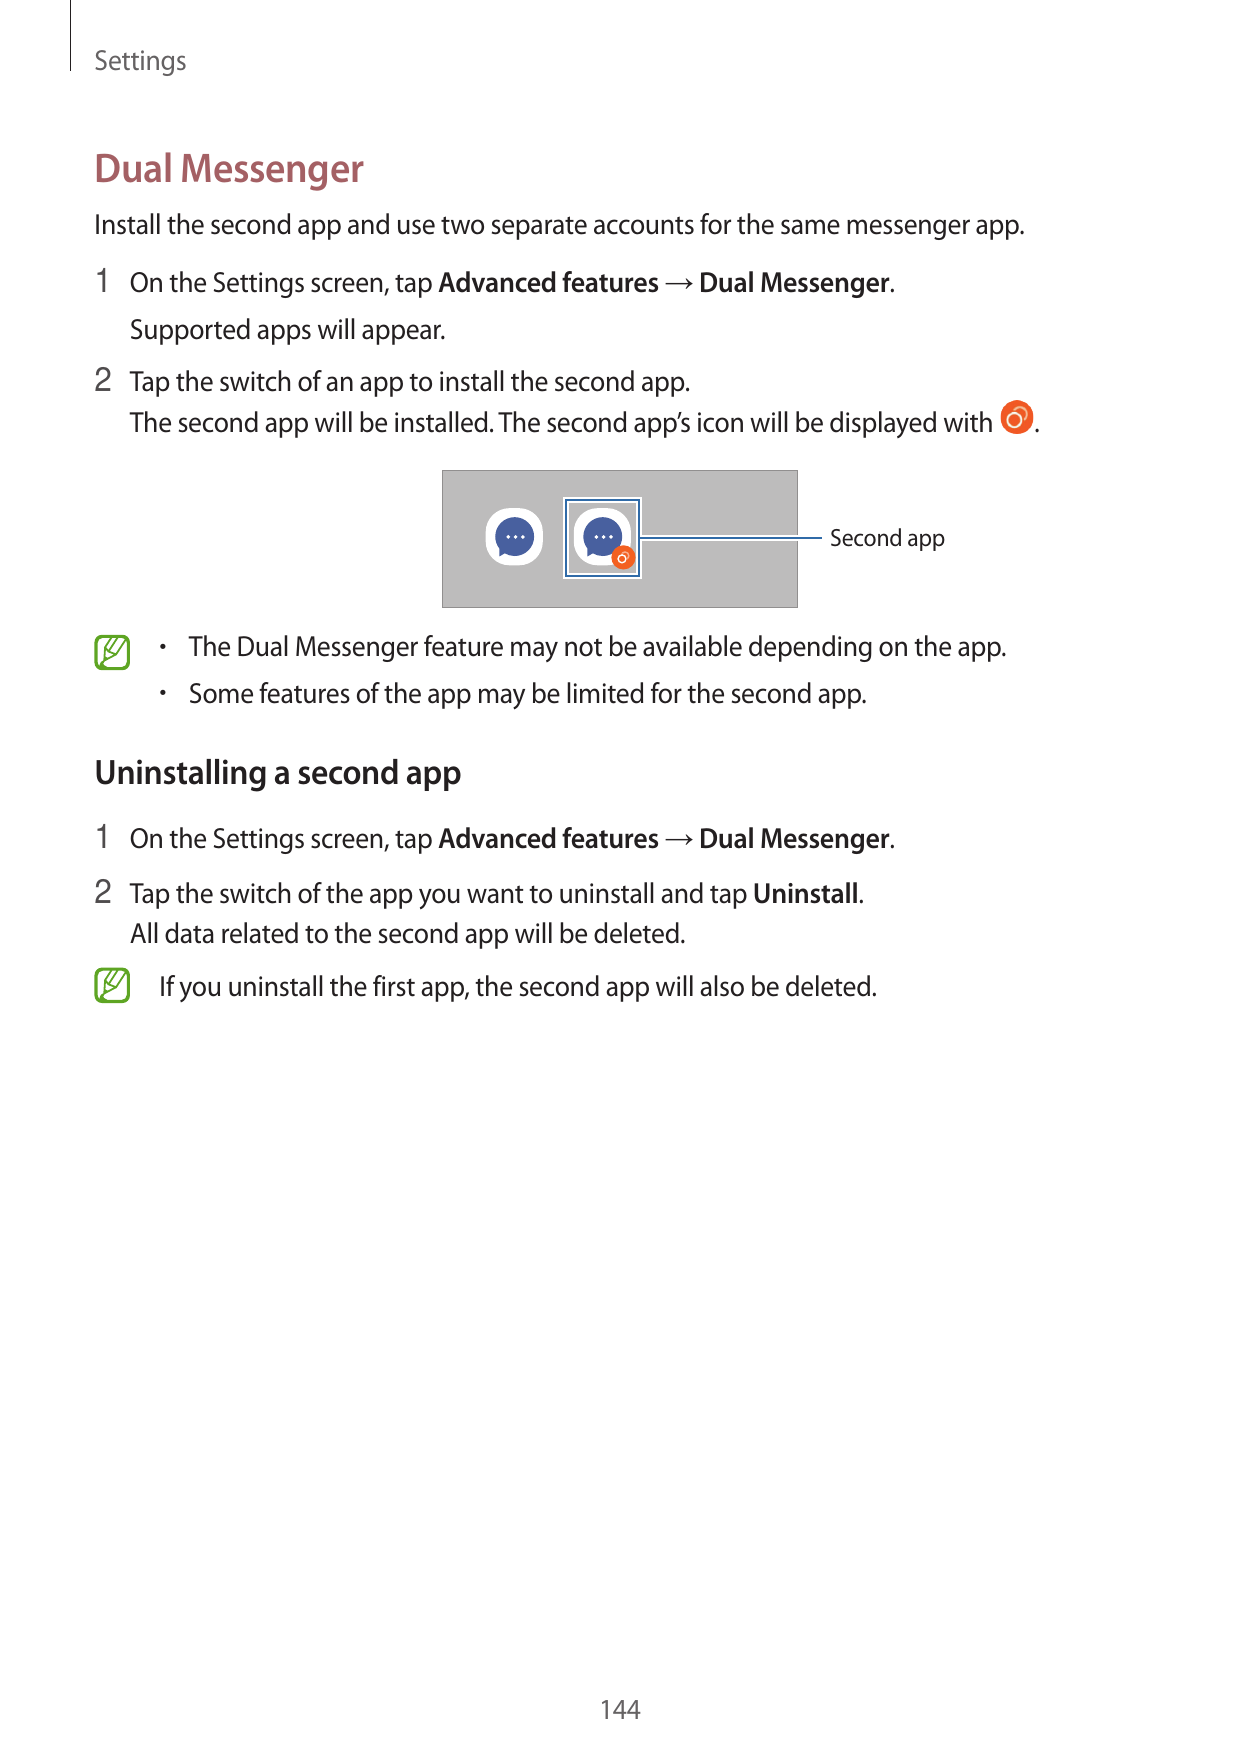 SettingsDual MessengerInstall the second app and use two separate accounts for the same messenger app.1 On the Settings screen, 